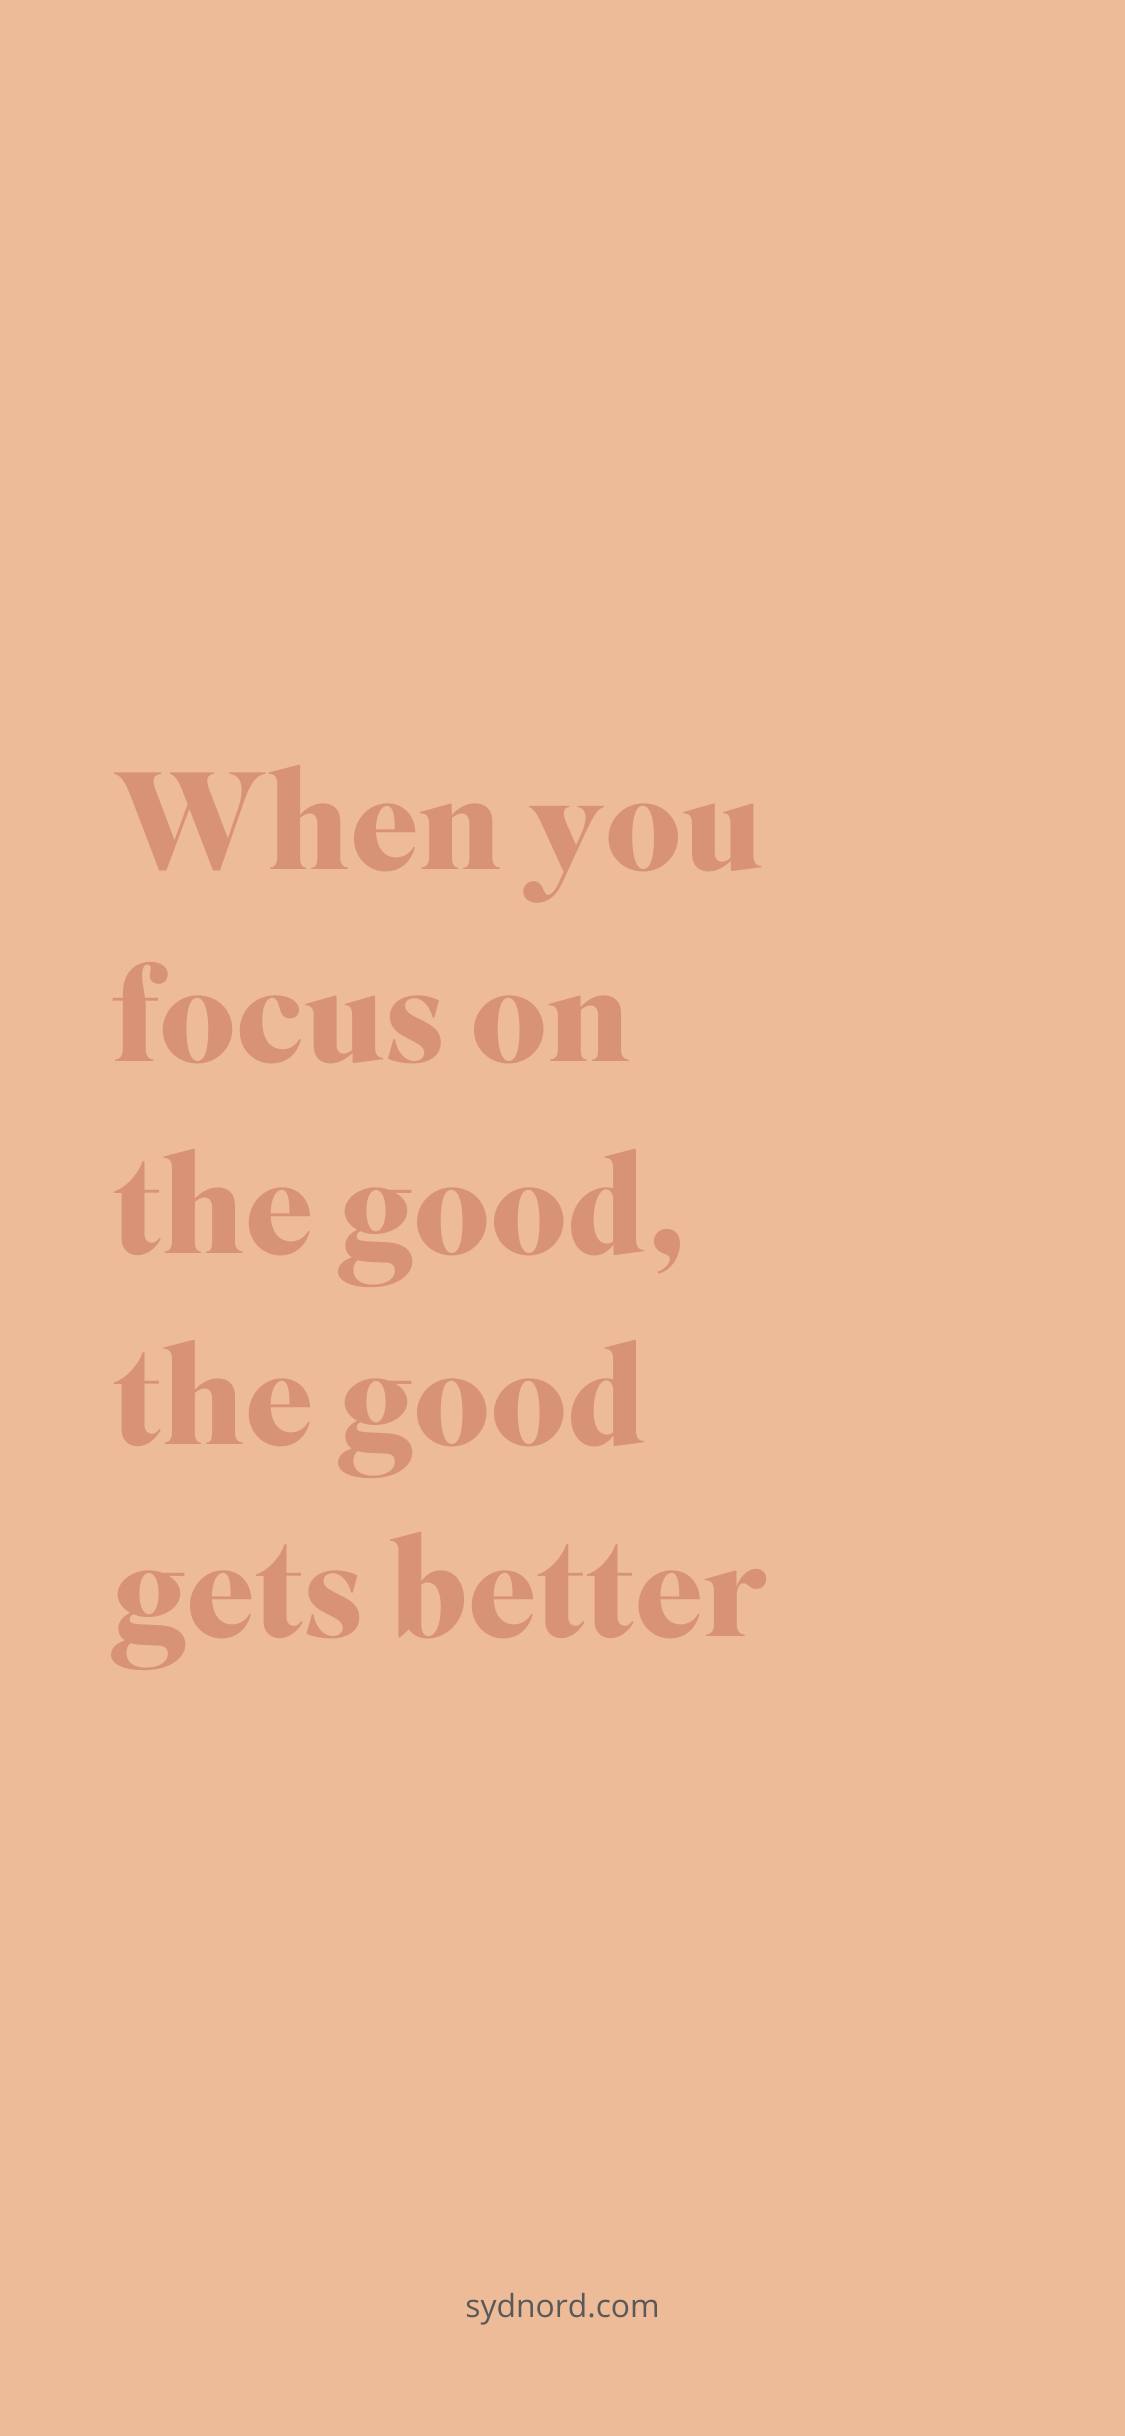 Positive quotes: When you focus on the good, the good gets better